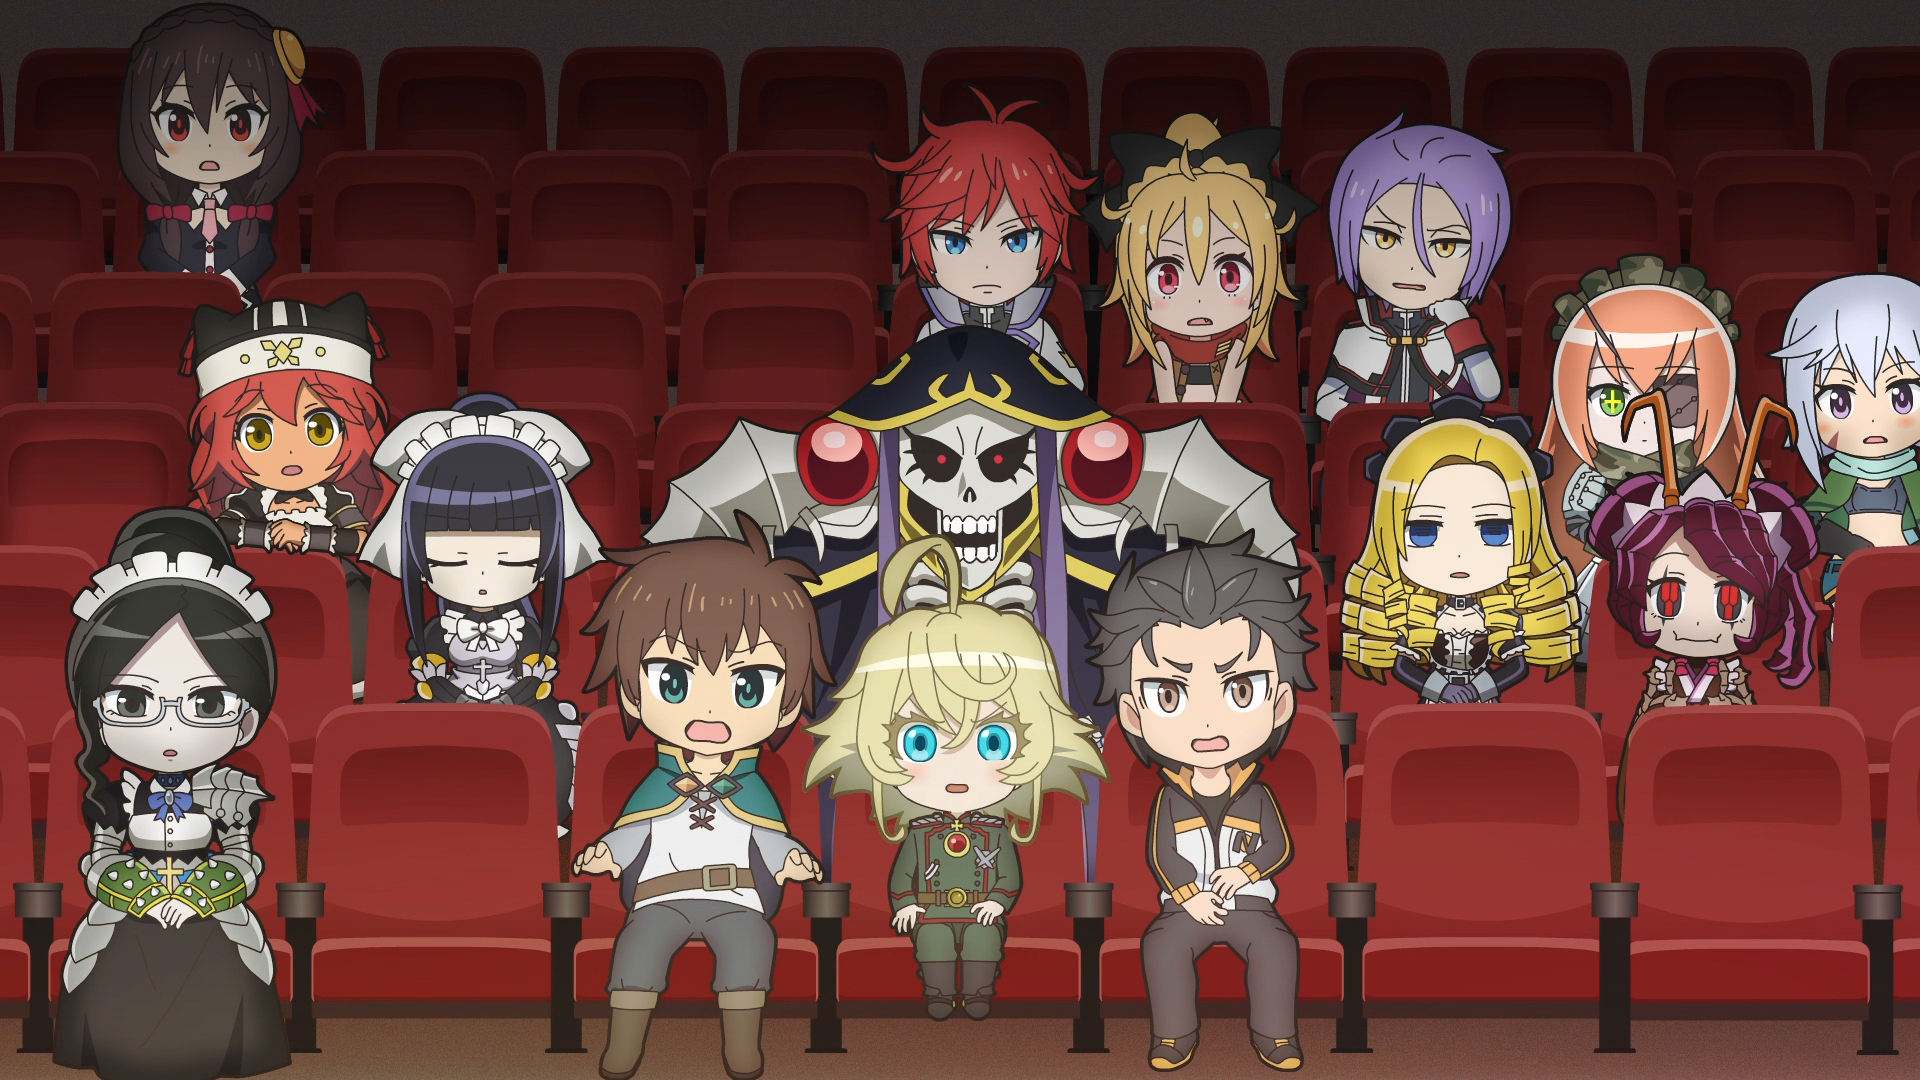 Characters from Overlord, Saga of Tanya the Evil, KONOSUBA -God's blessing on this wonderful world !, and Re: ZERO -Starting Life in Another World- pack the school auditorium in a scene from the Isekai Quartet TV anime.